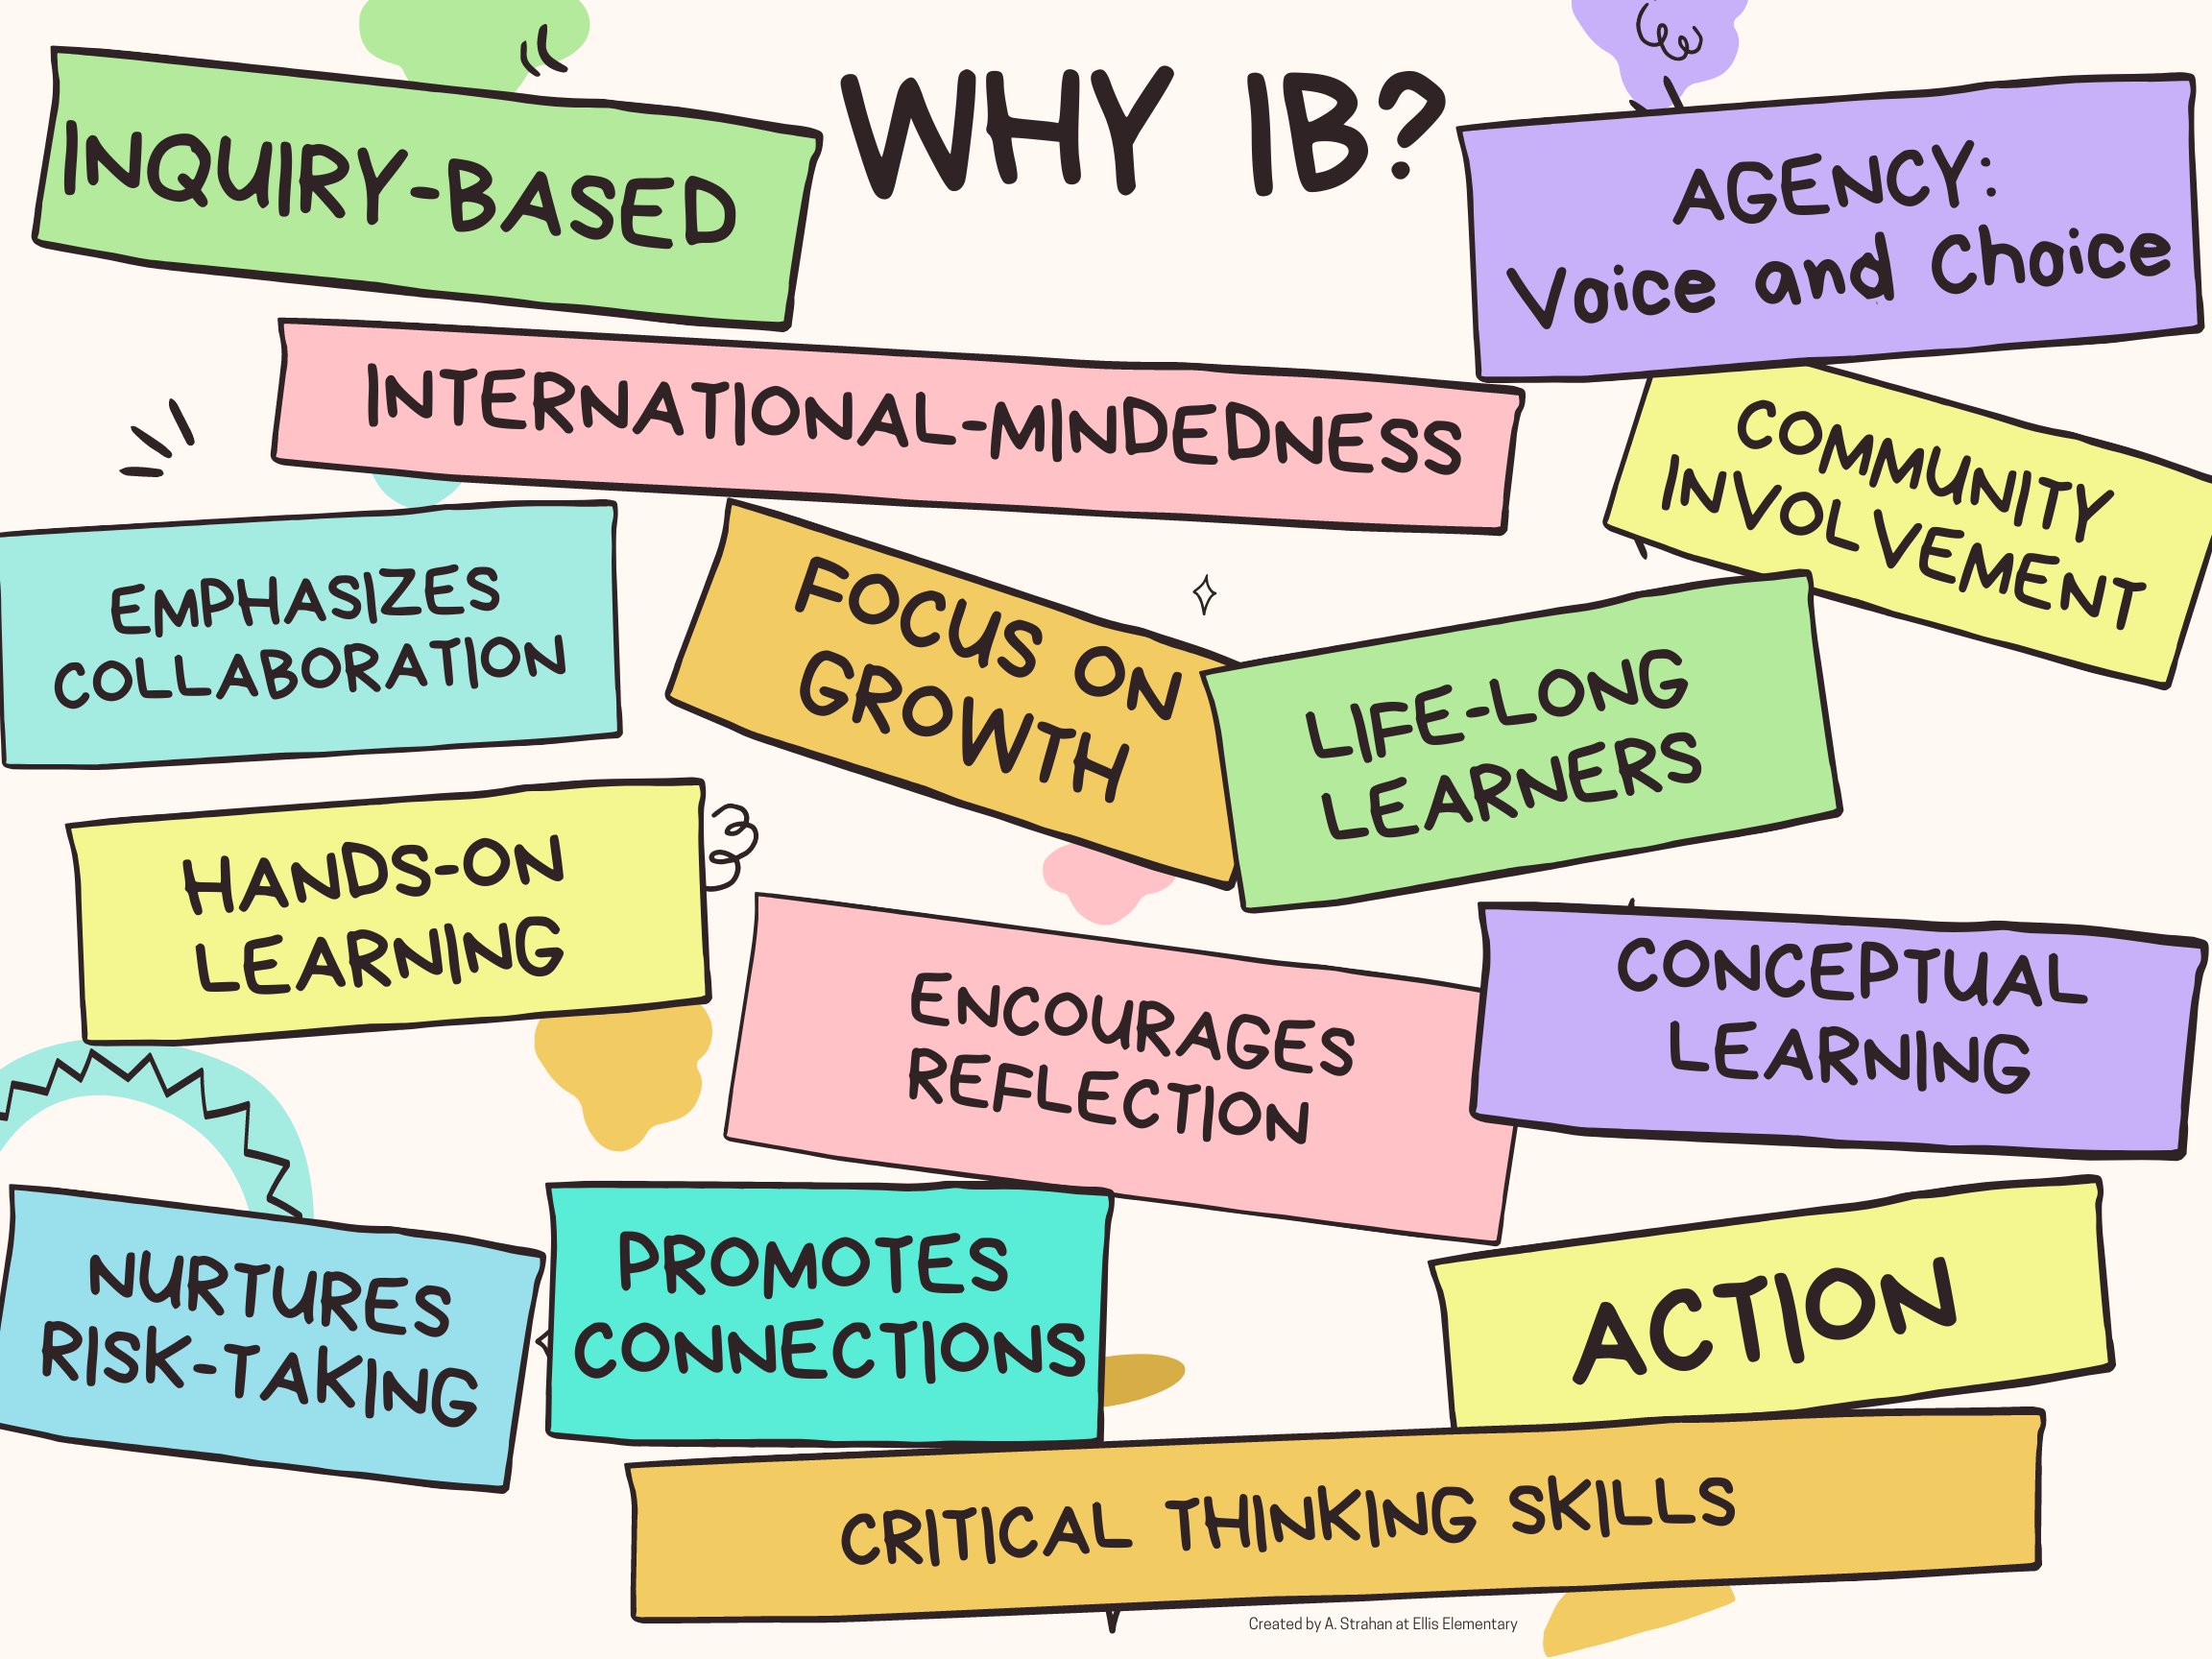 Image of words Inquiry-based International Mindedness, emphasize collaboration, hands-on learning,  nurtures risk taking, critical thinking skills, lifelong learners, Agency: voice and choice, encourages reflection, promotes connections, action, community involvement